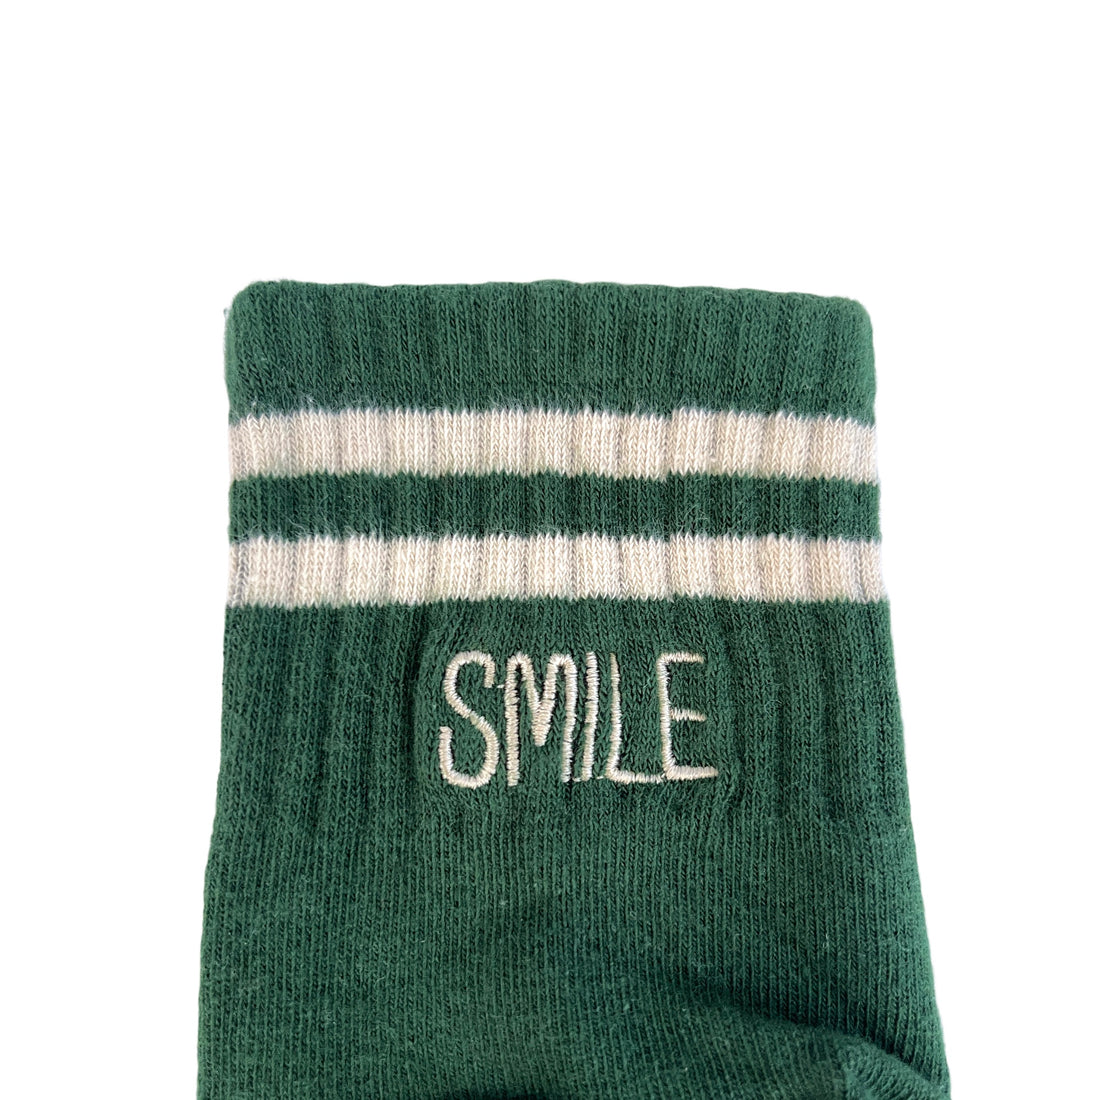 Green & white socks with "SMILE" word embroidered